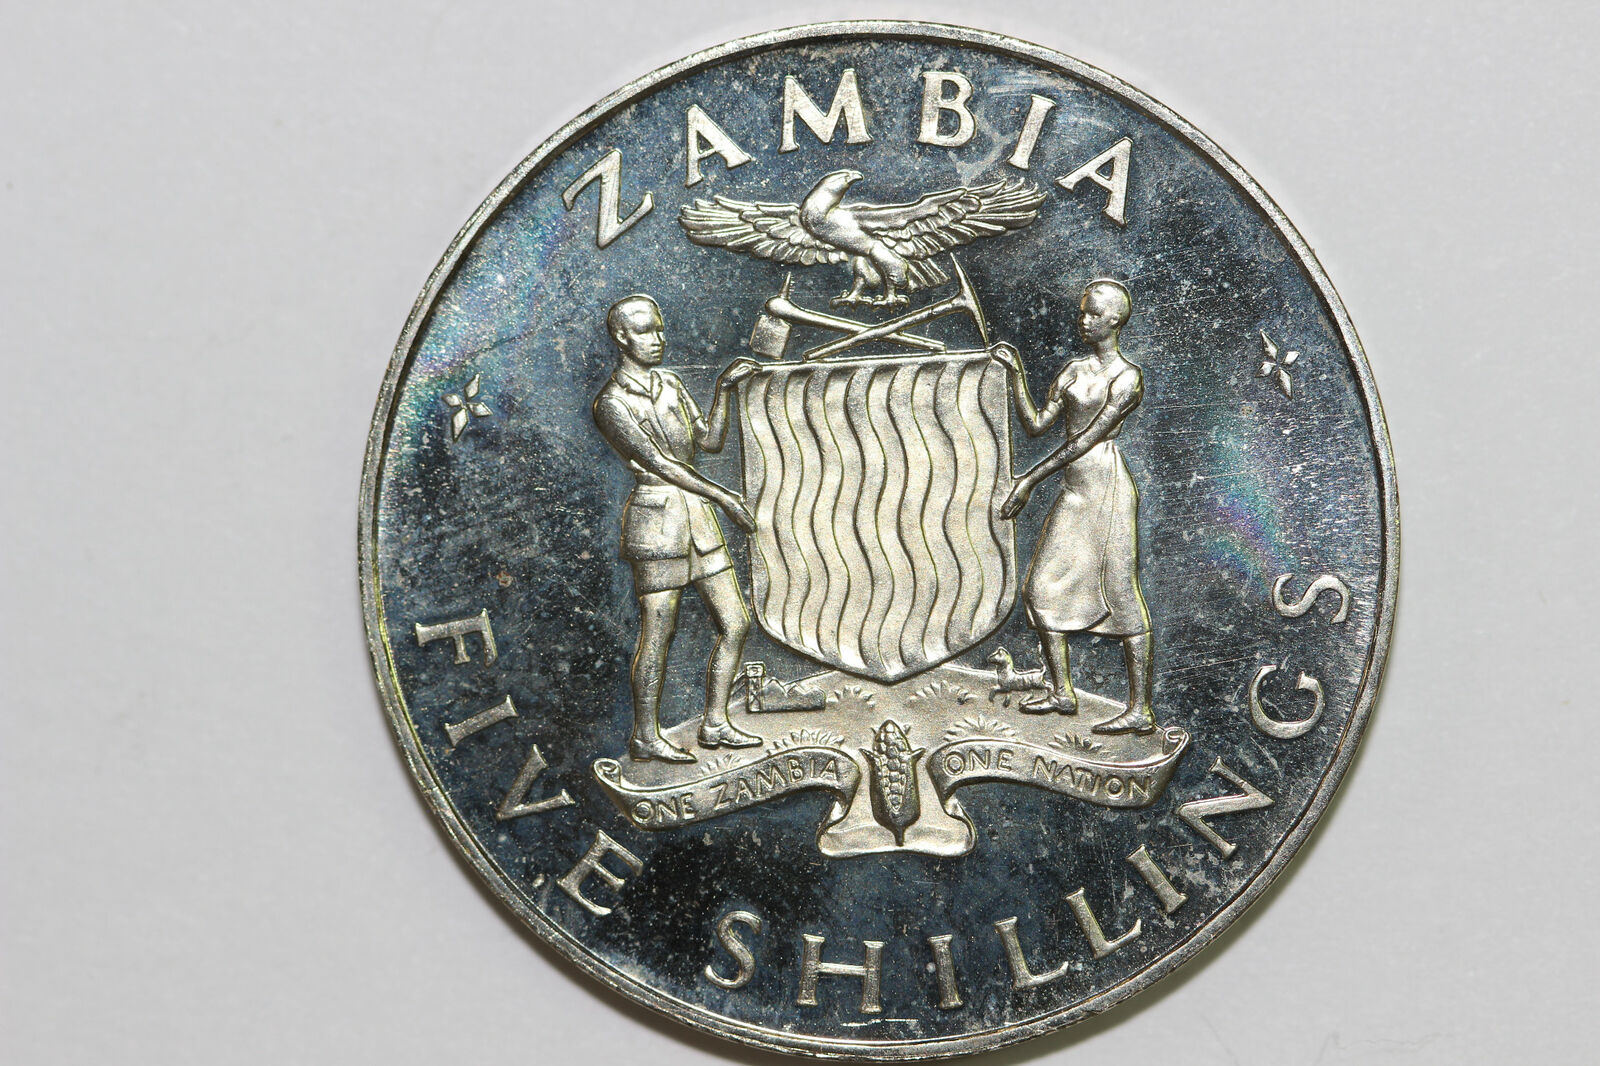 1965 Zambia 5 Shillings Independence Cu/ni Coin Grades Proof (num6948)